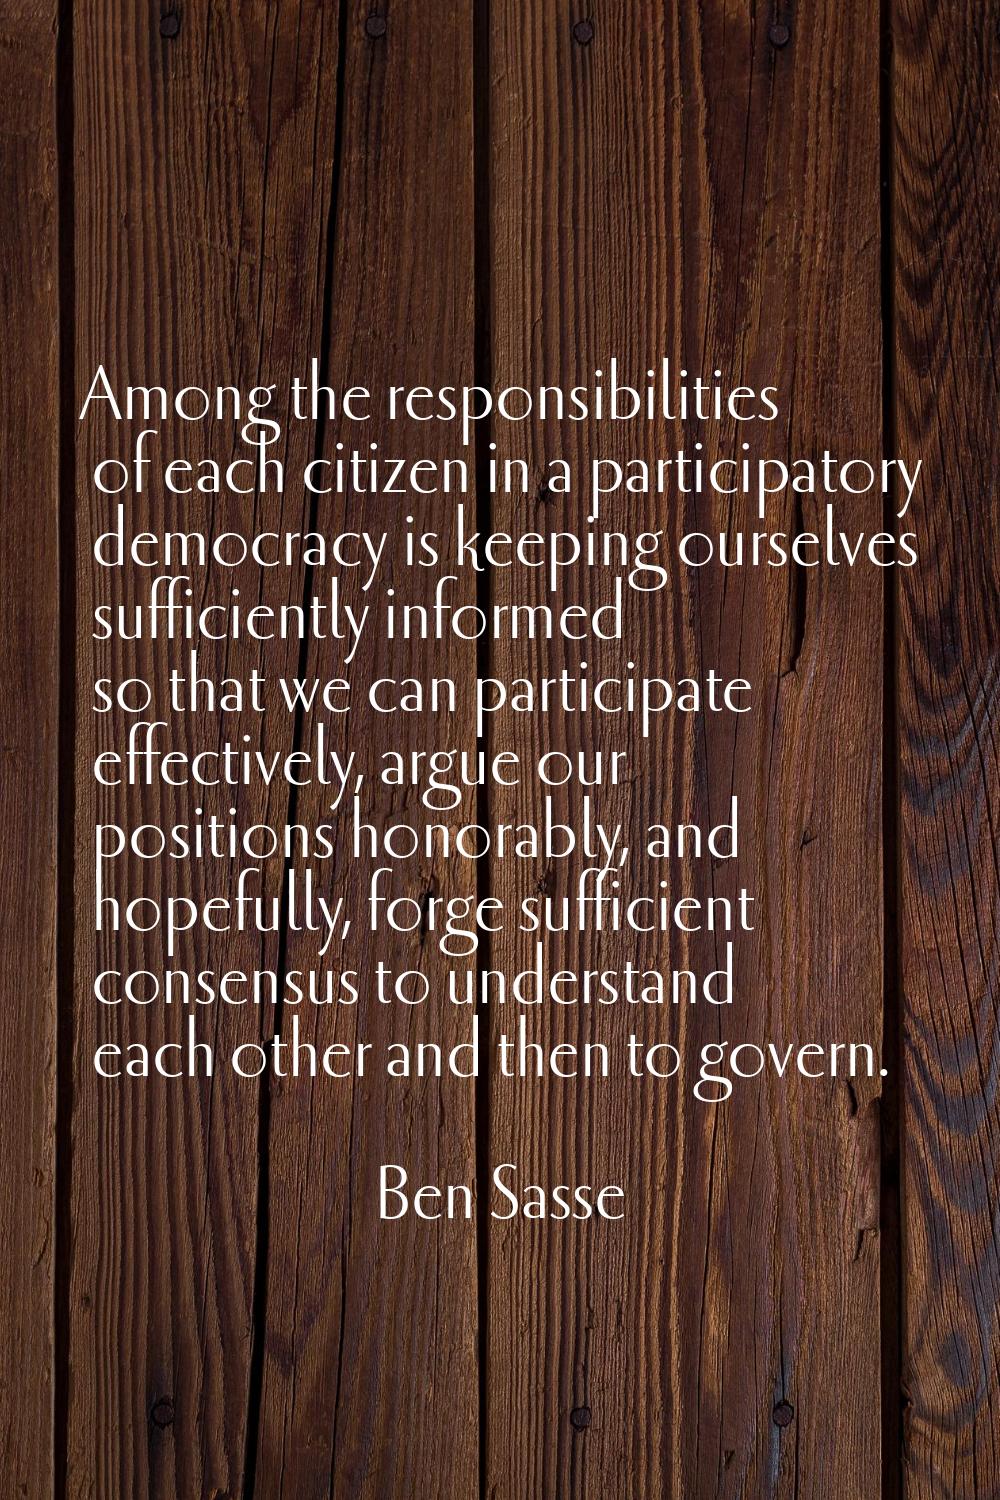 Among the responsibilities of each citizen in a participatory democracy is keeping ourselves suffic